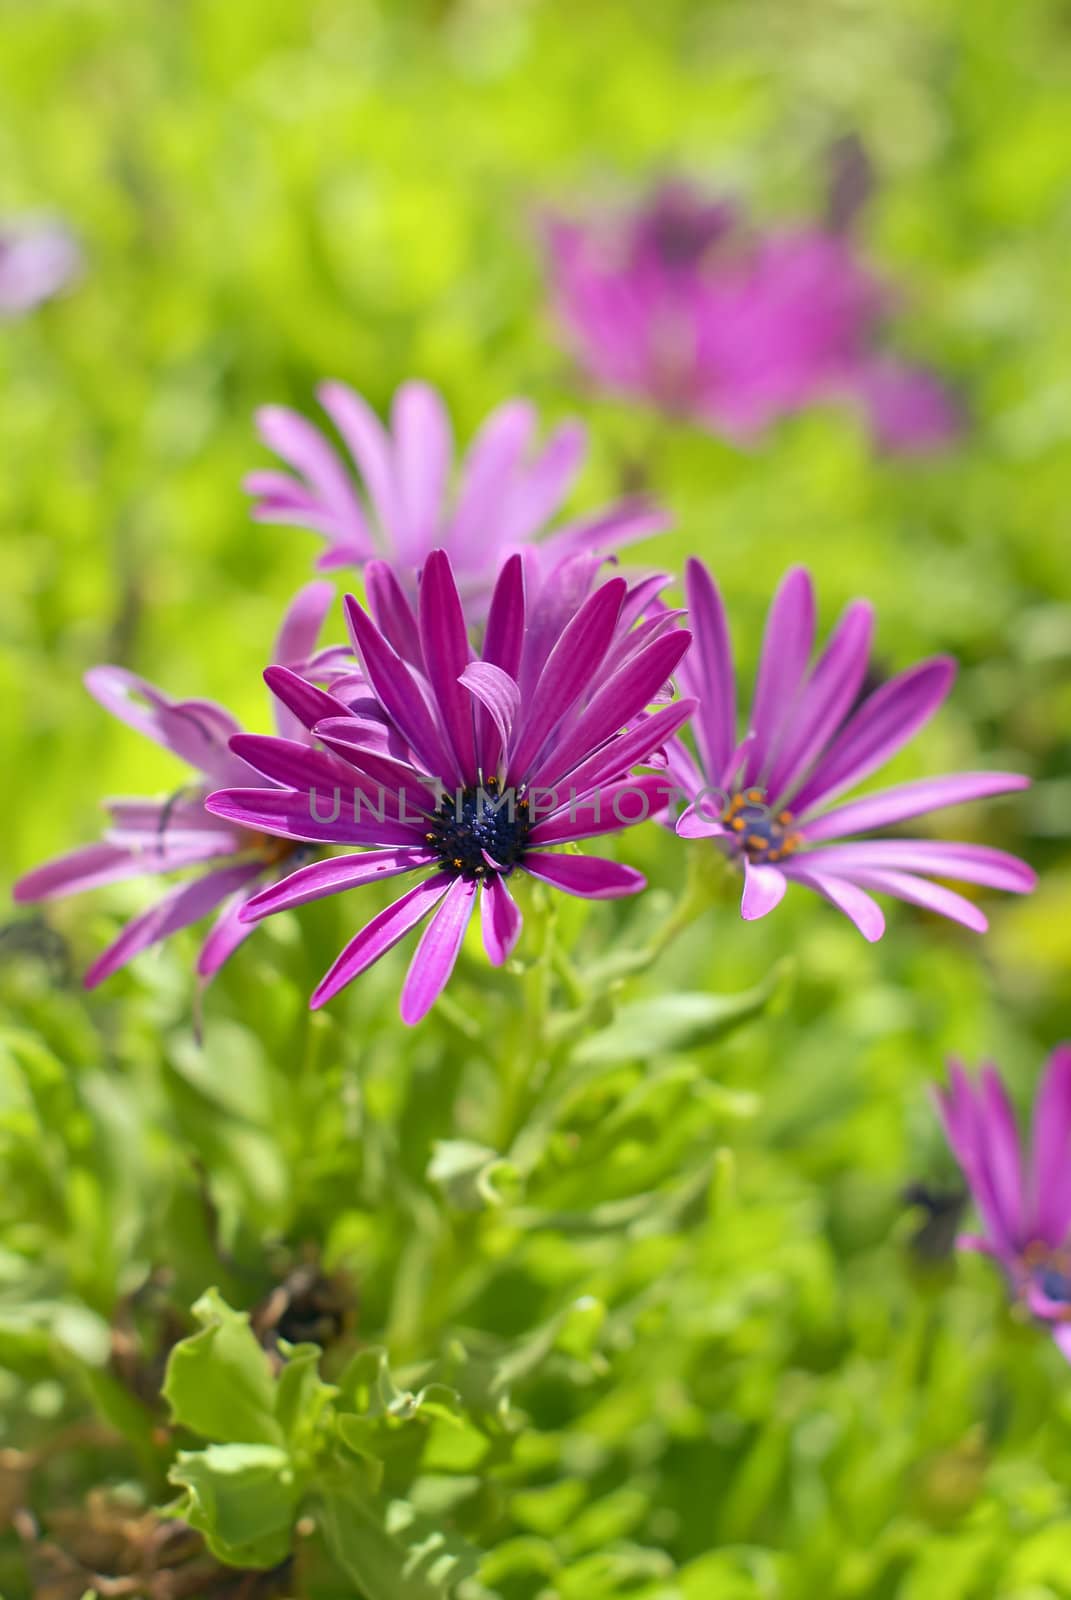 African Daisy Flower by Vac